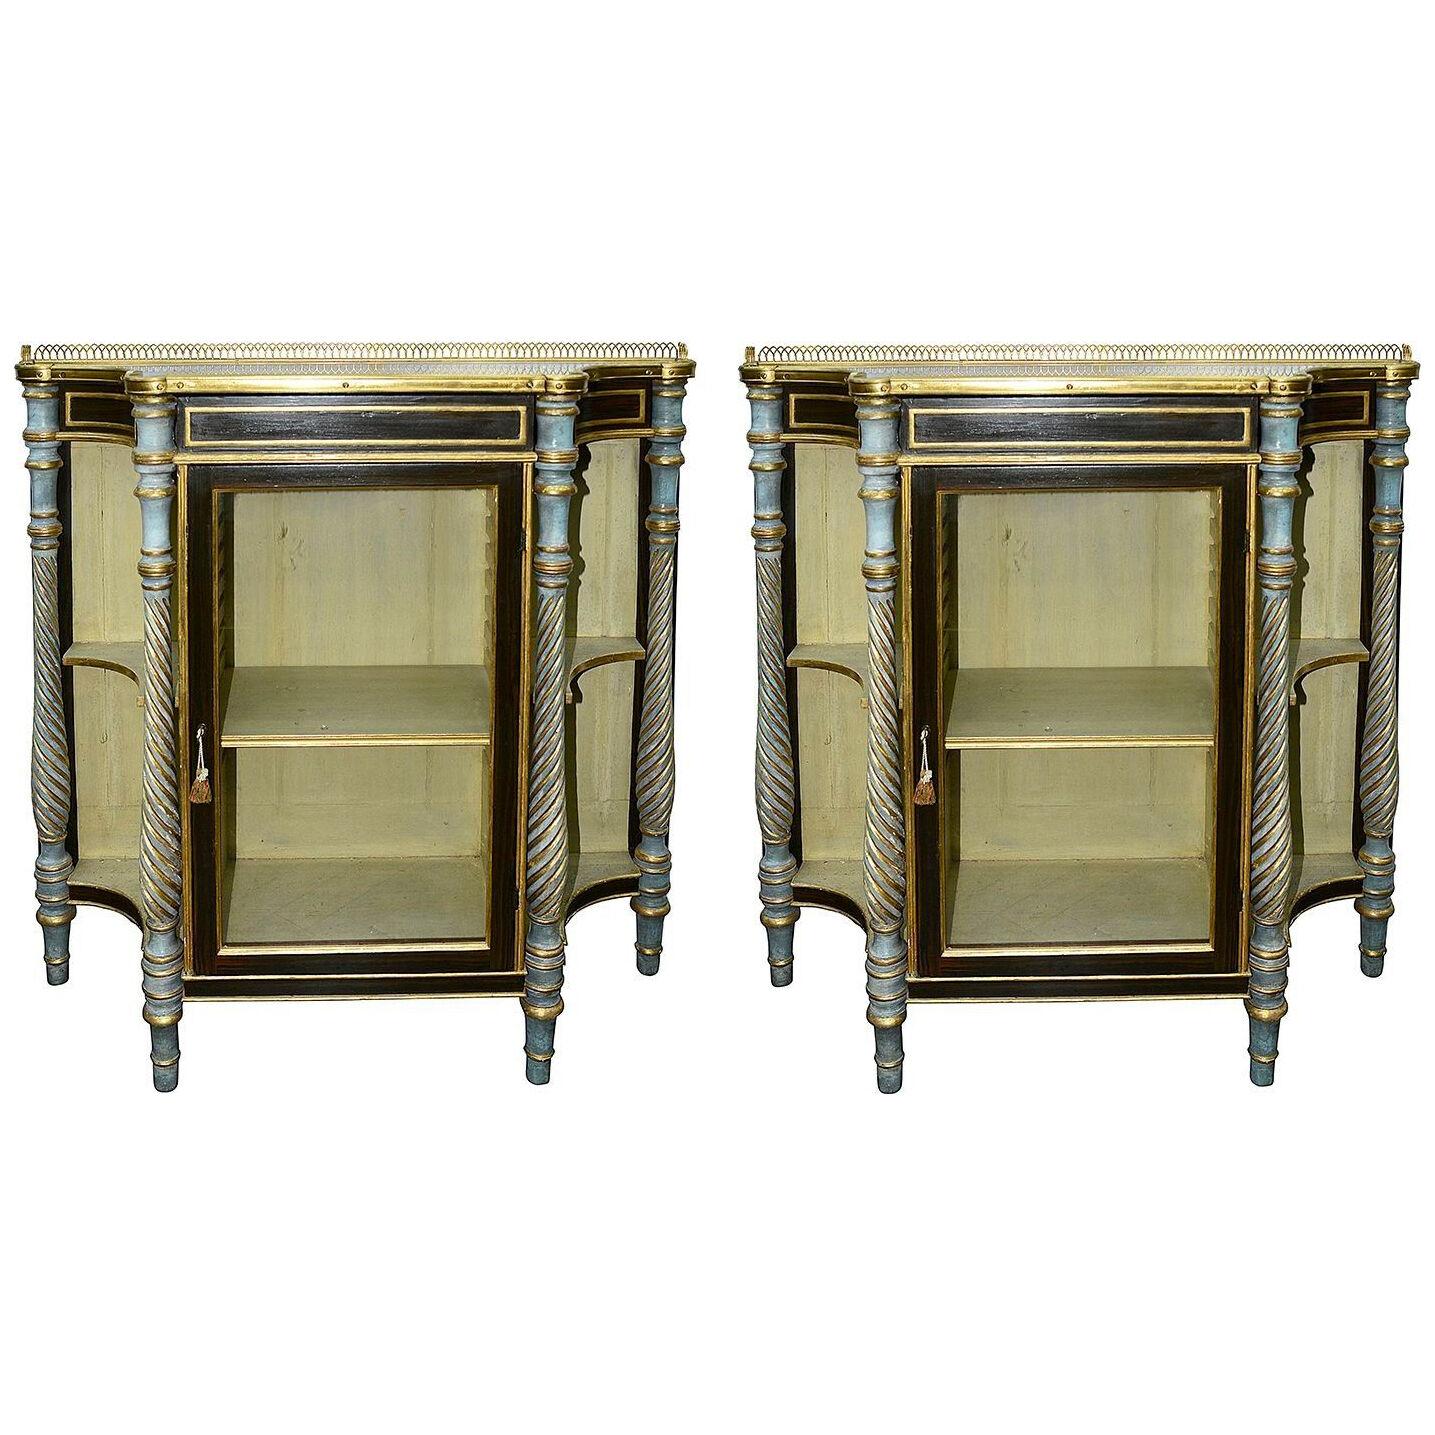 A pair of Regency paint decorated and giltwood side cabinets, circa 1820